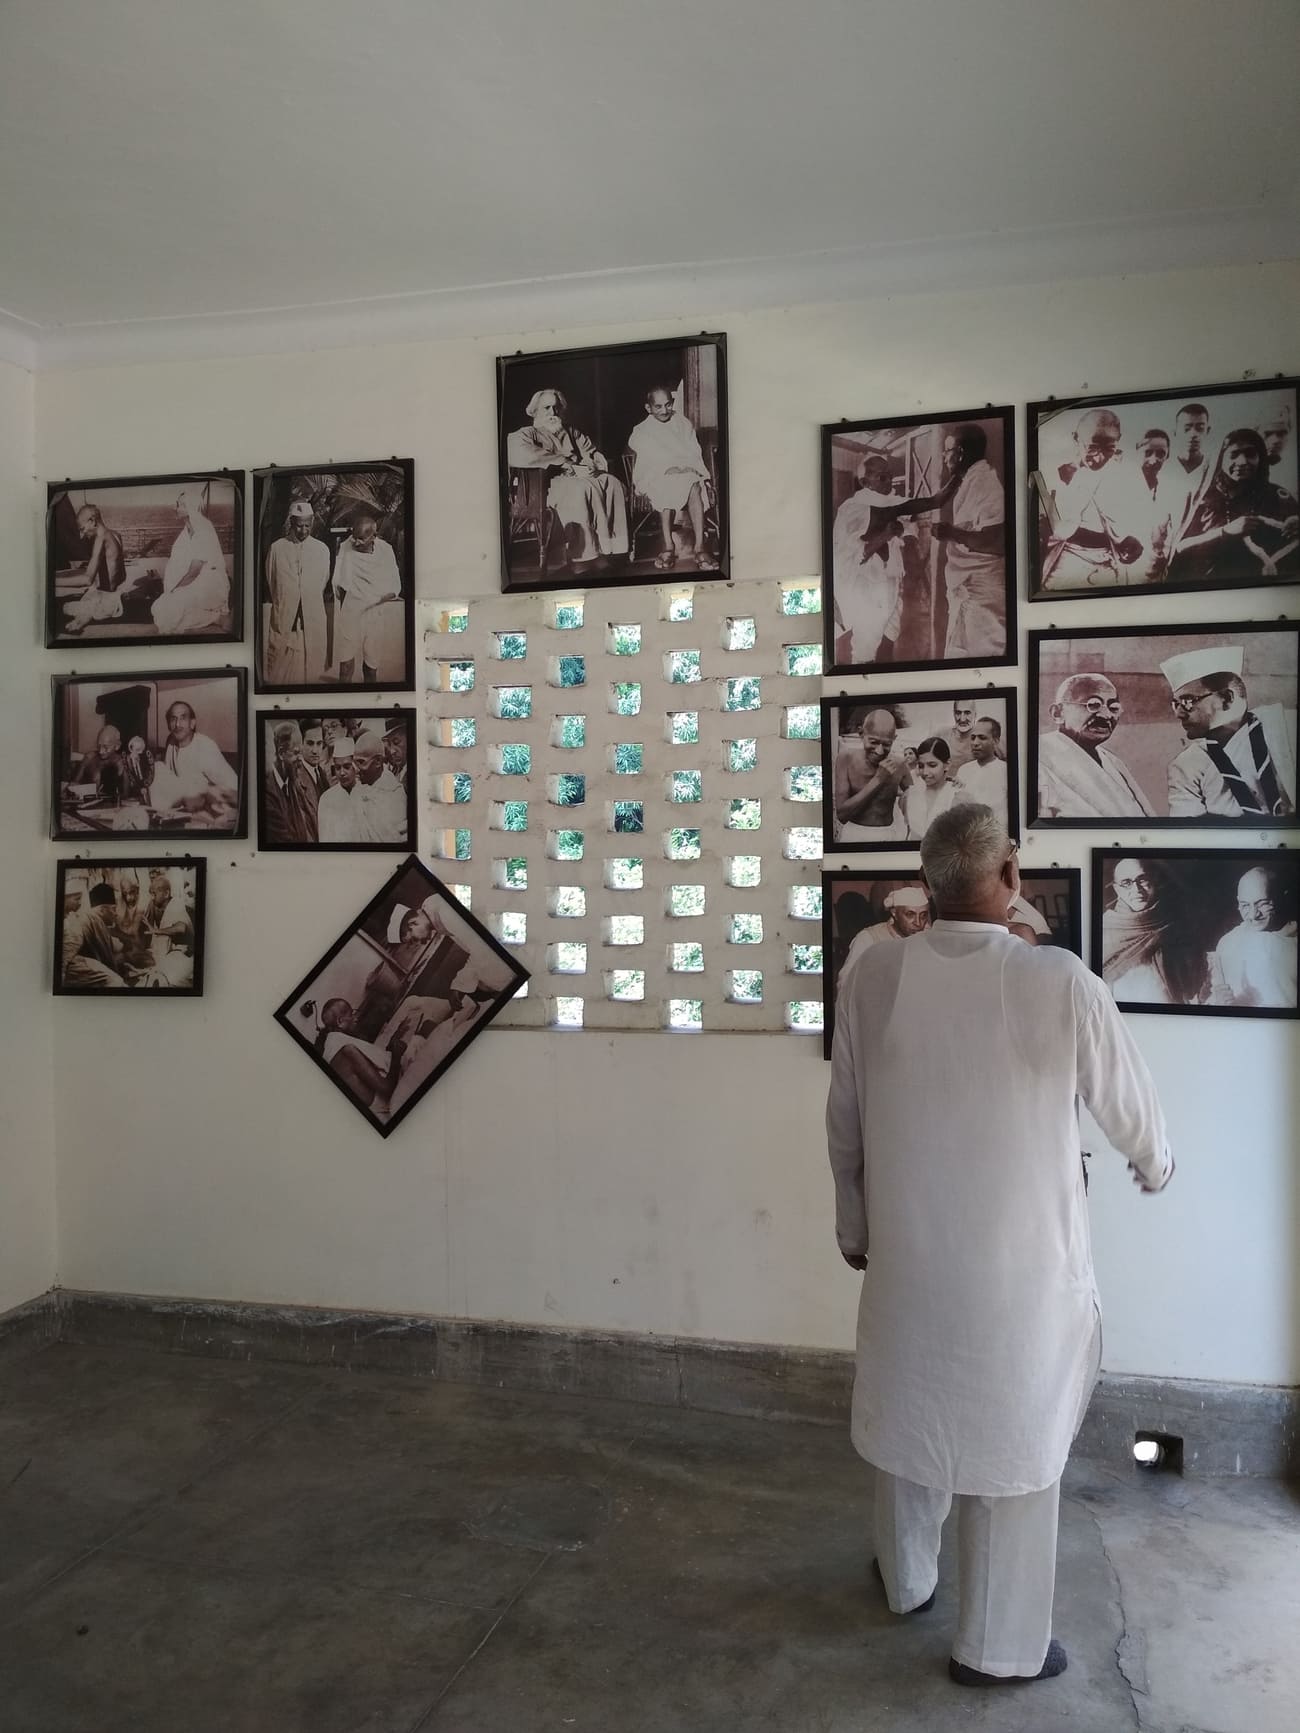 Visitor looking at the pictures of Pandit Nehru with other leaders in the Mahatma Gandhi room, Delhi